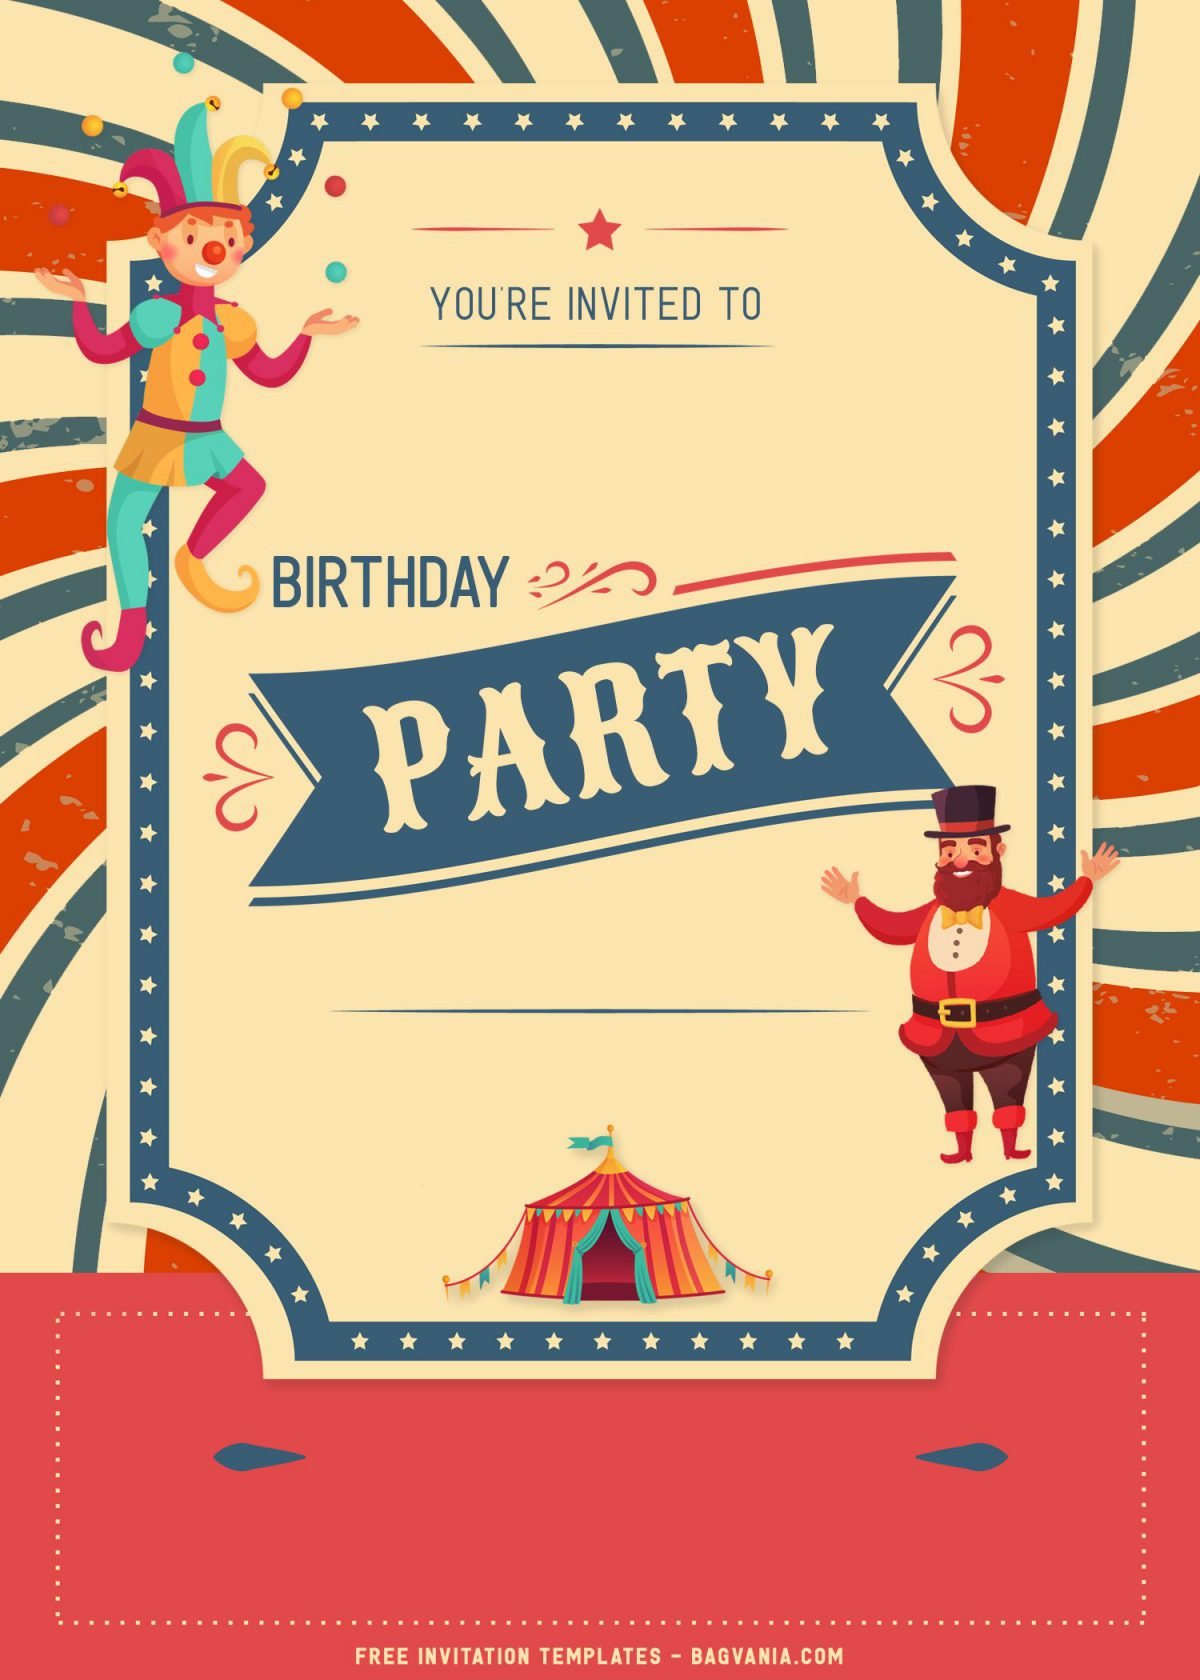 8+ Cute Circus Themed Birthday Invitation Templates with Clown on unicycle